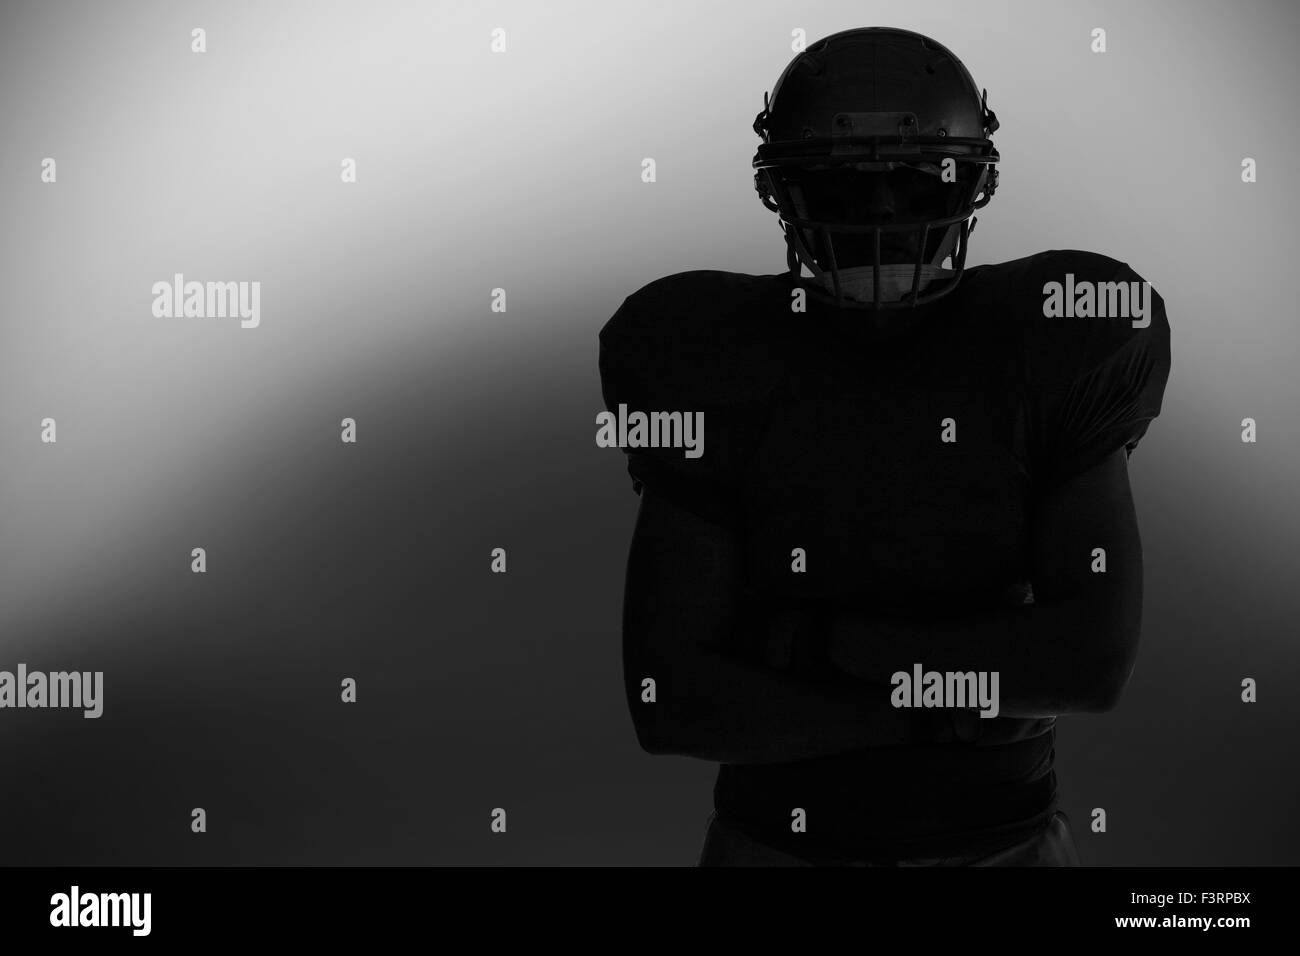 football player black and white photography